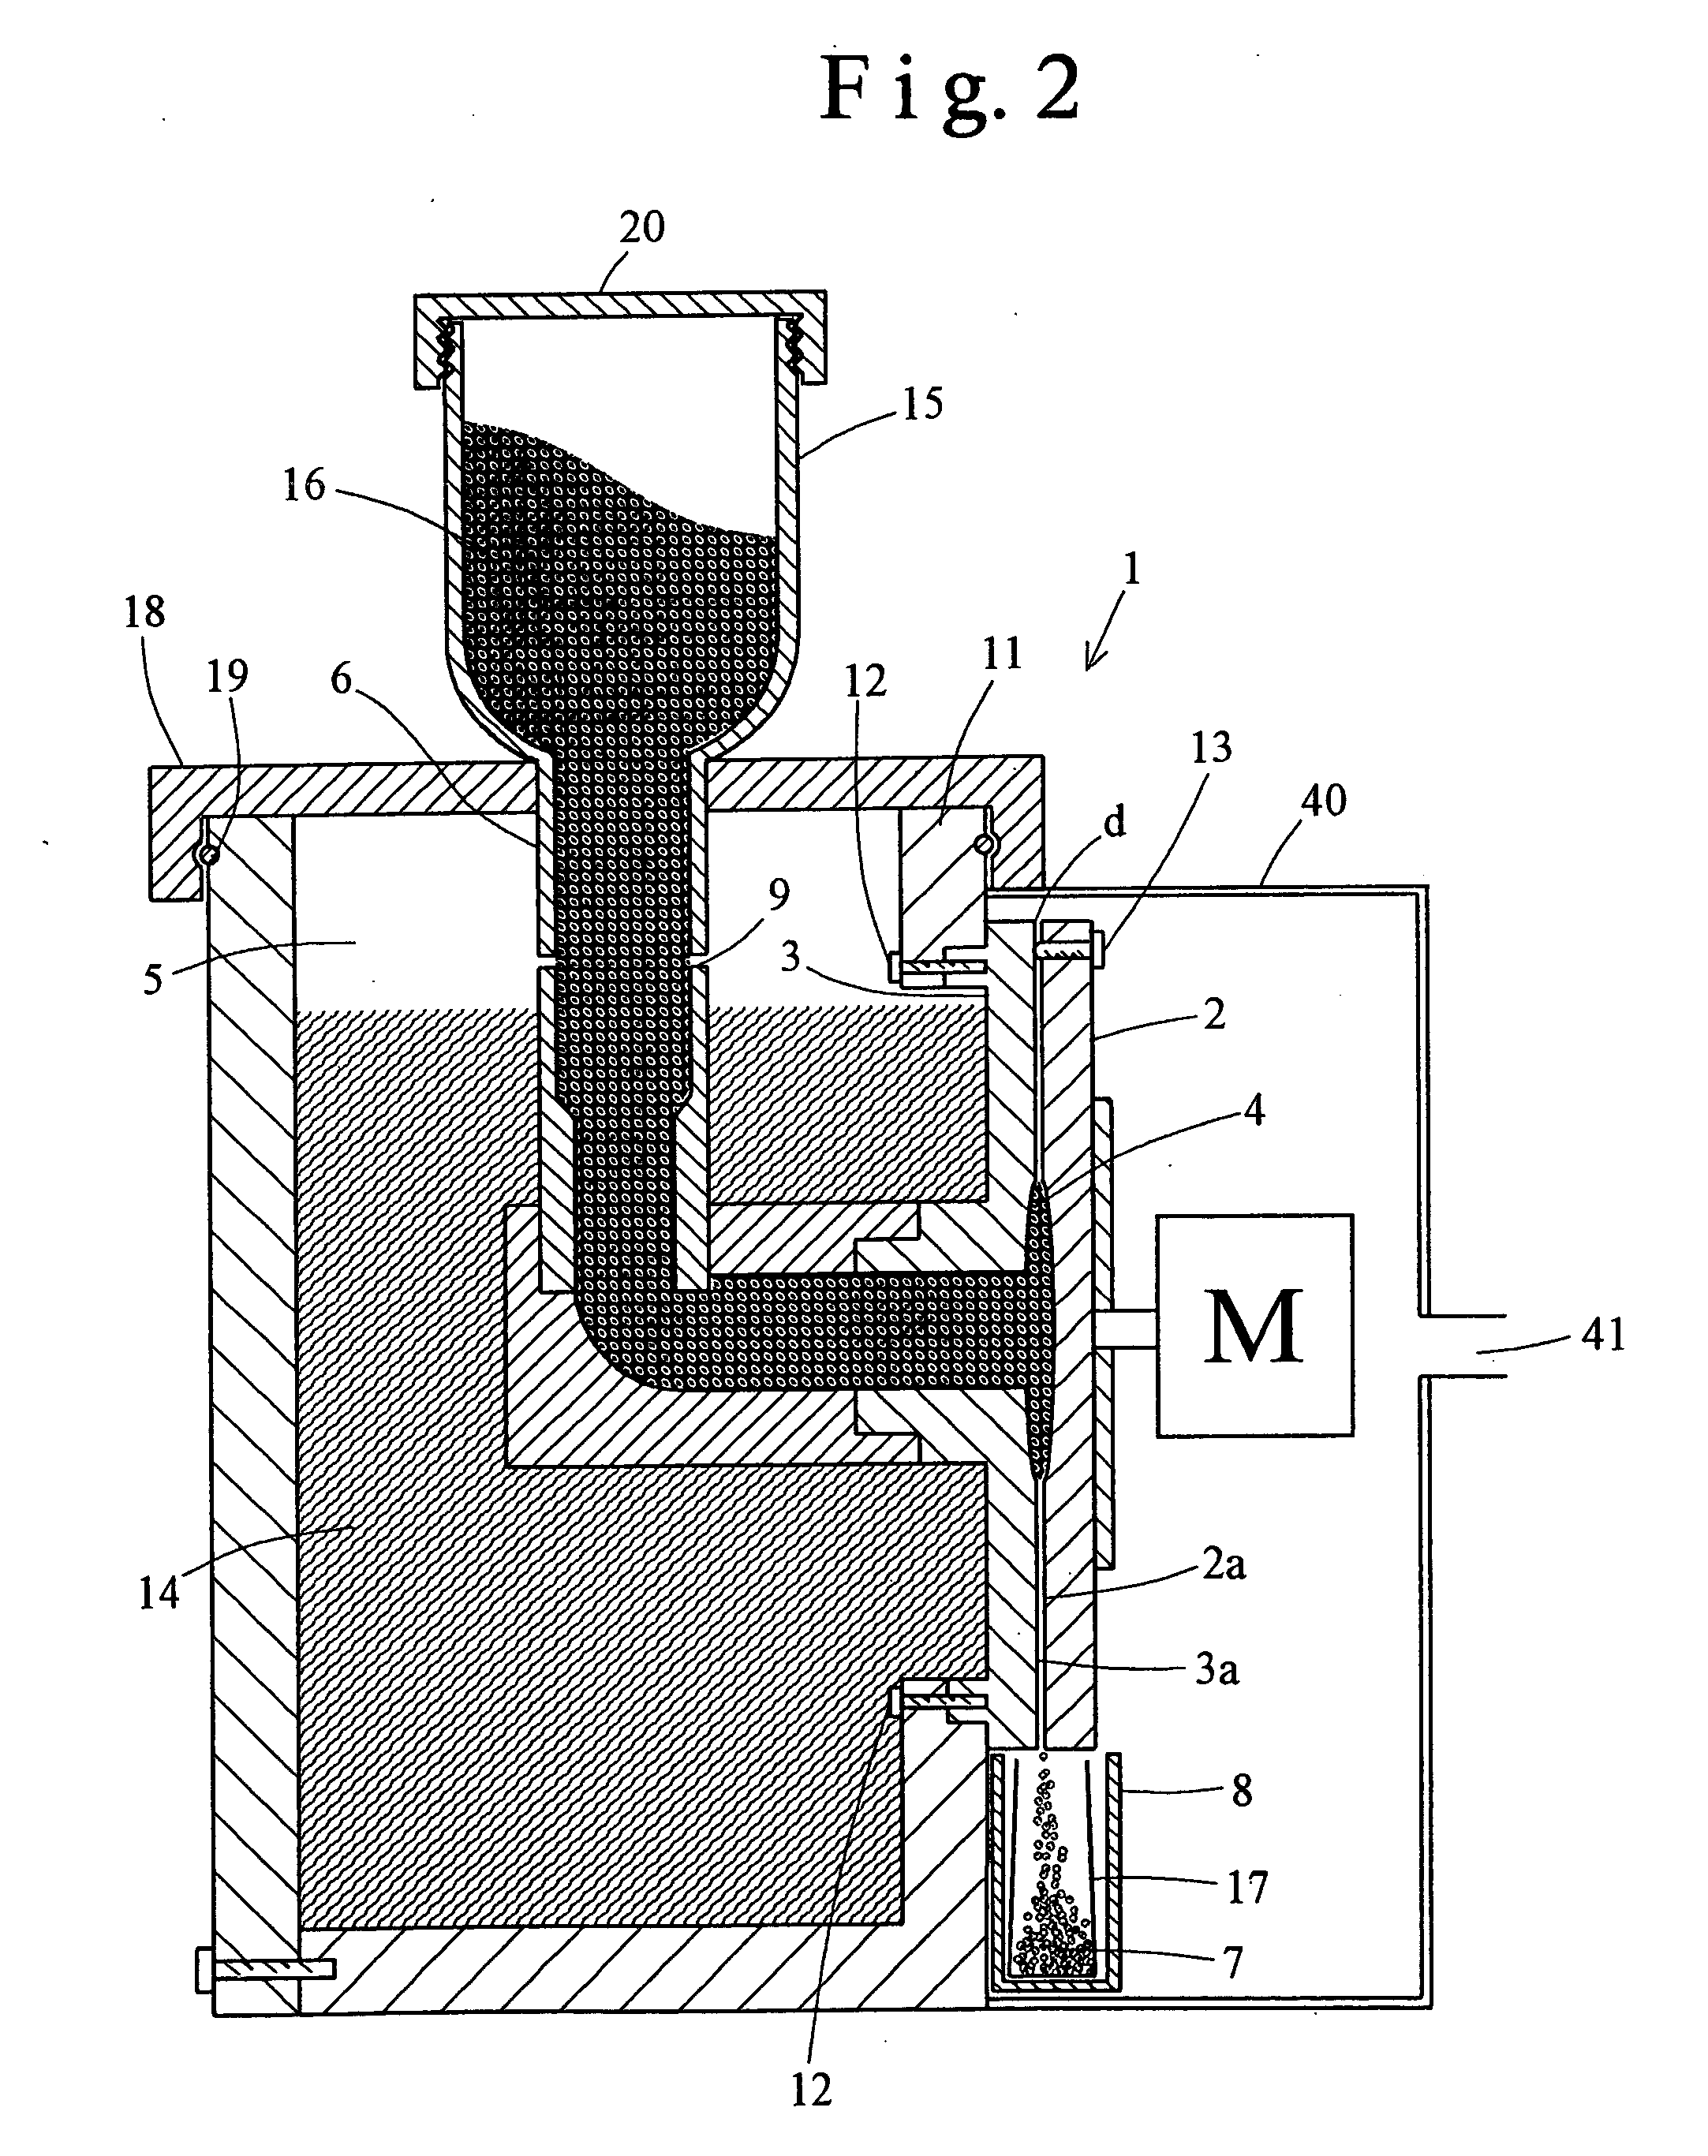 Process for producing crushed product, apparatus therefor and crushed product